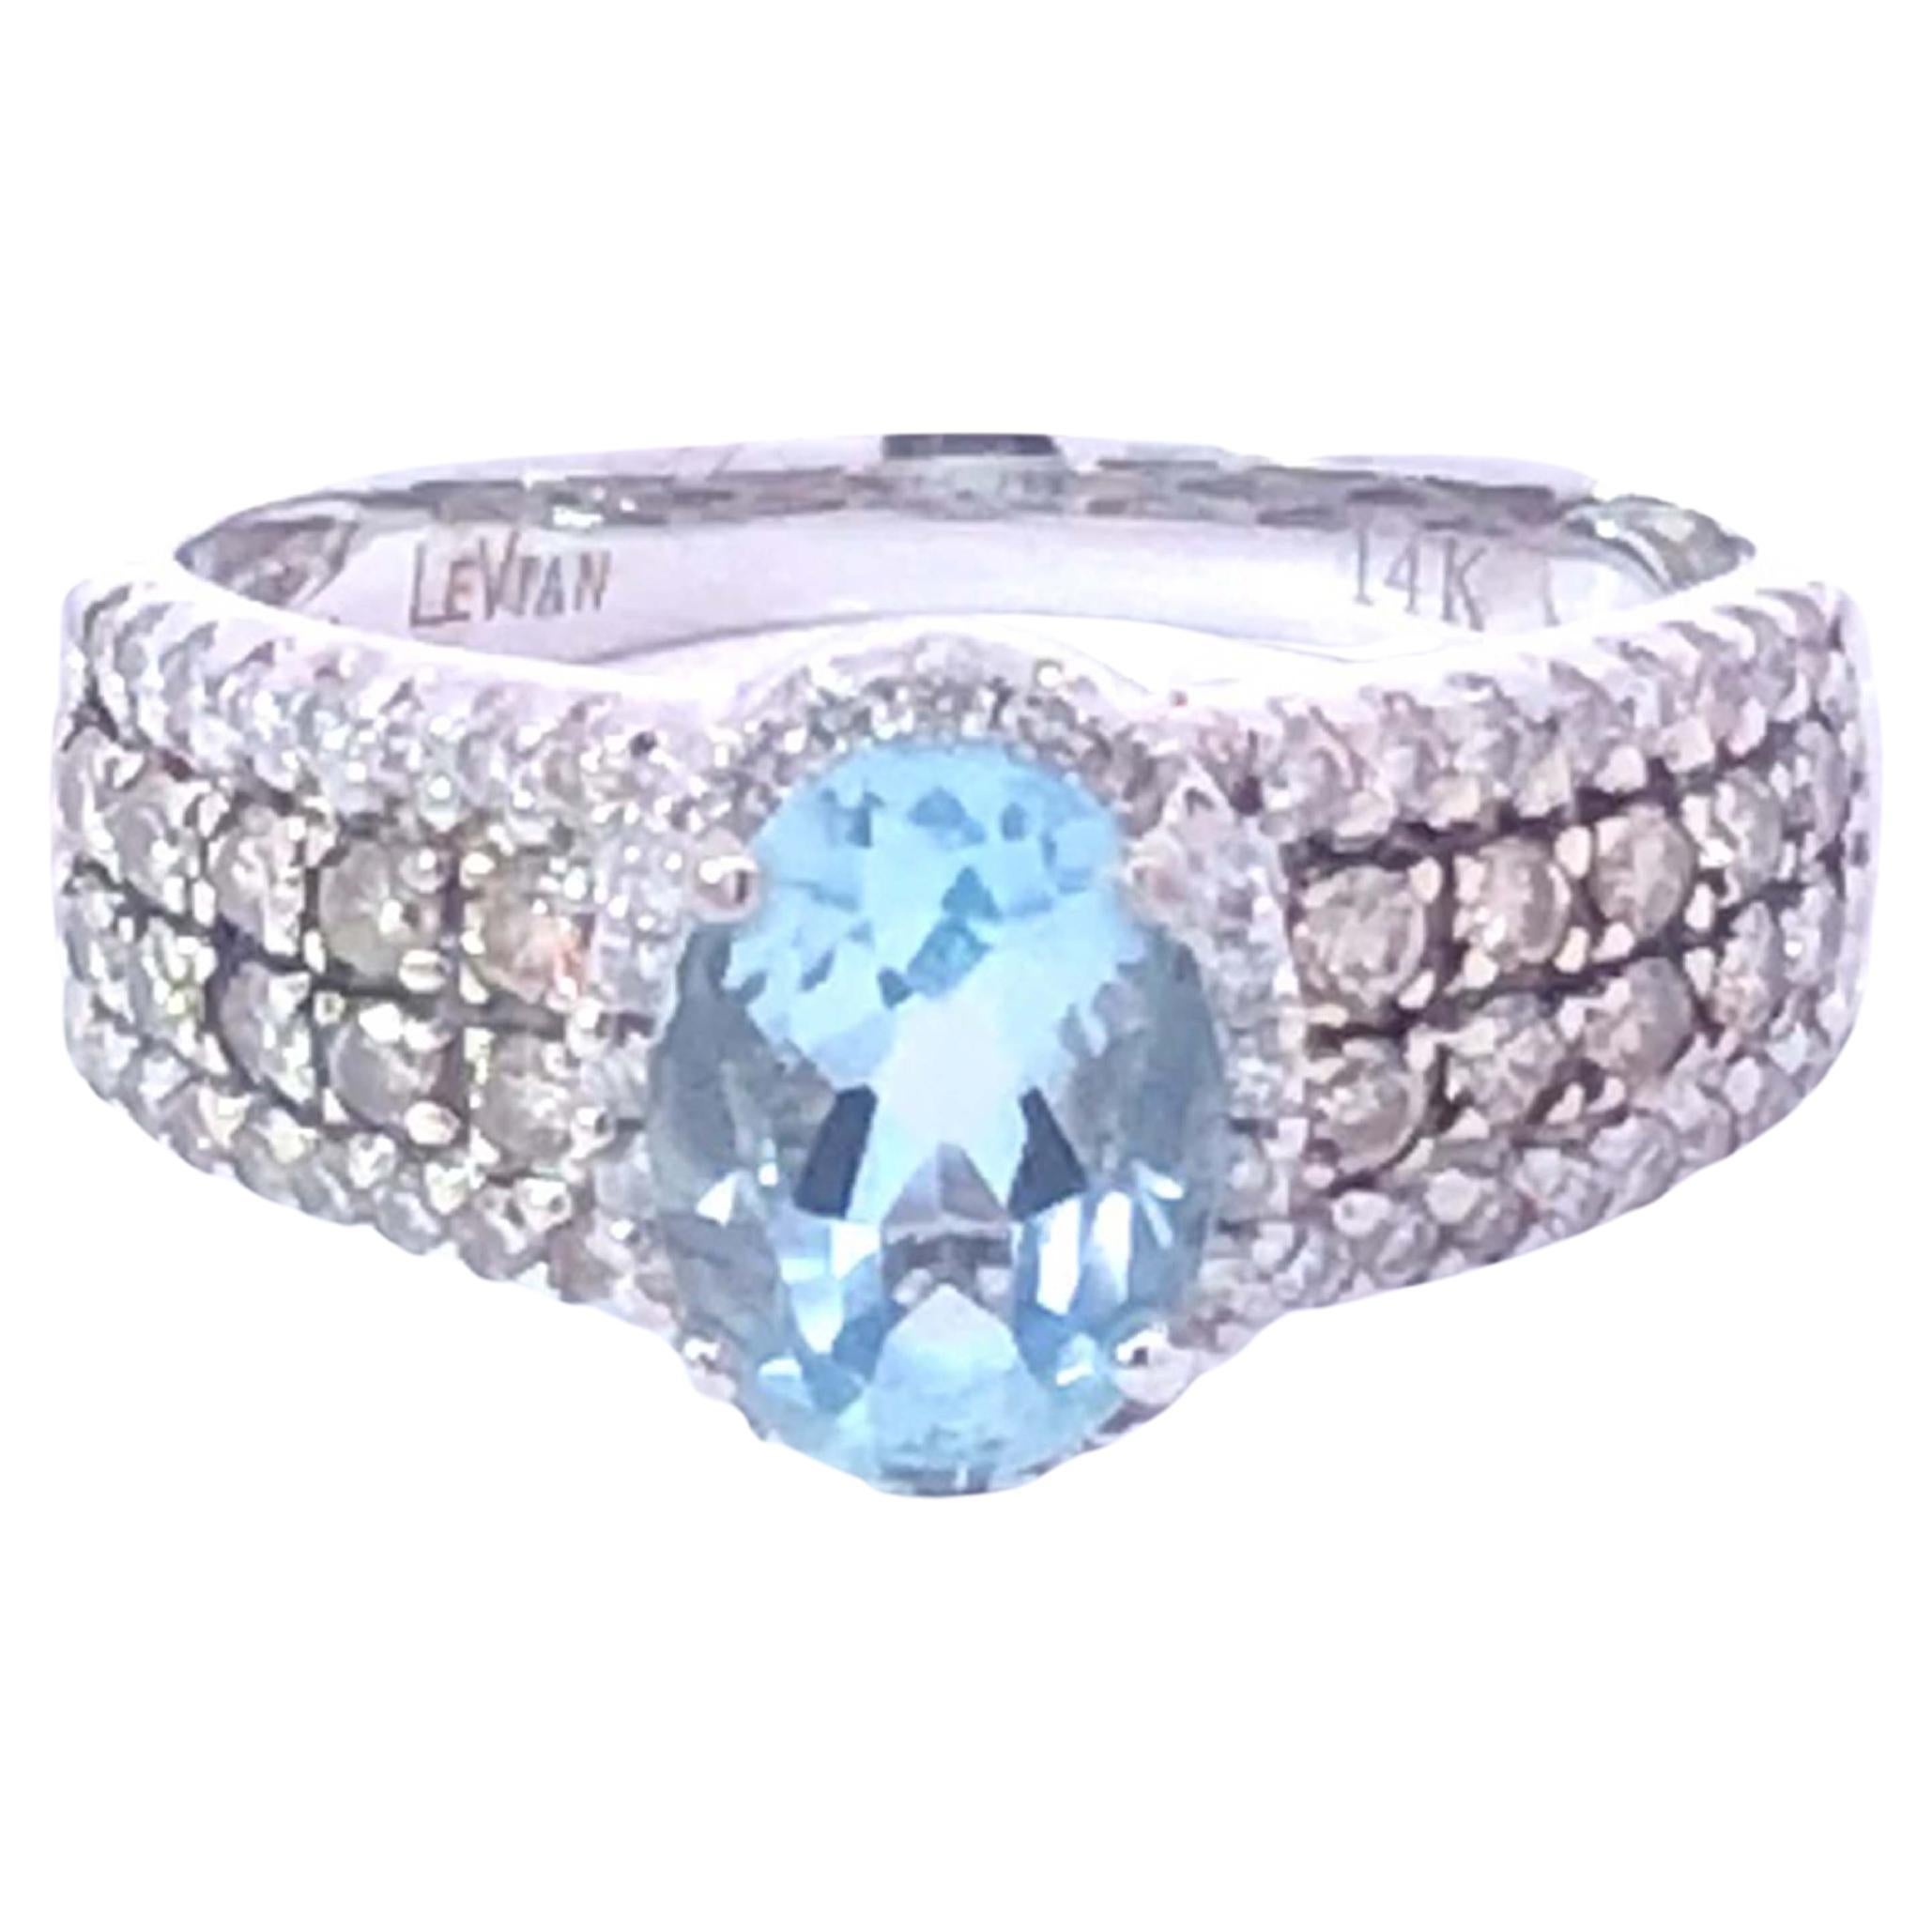 Le Vian Aquamarine and Diamond Statement Ring in 14k White Gold For Sale